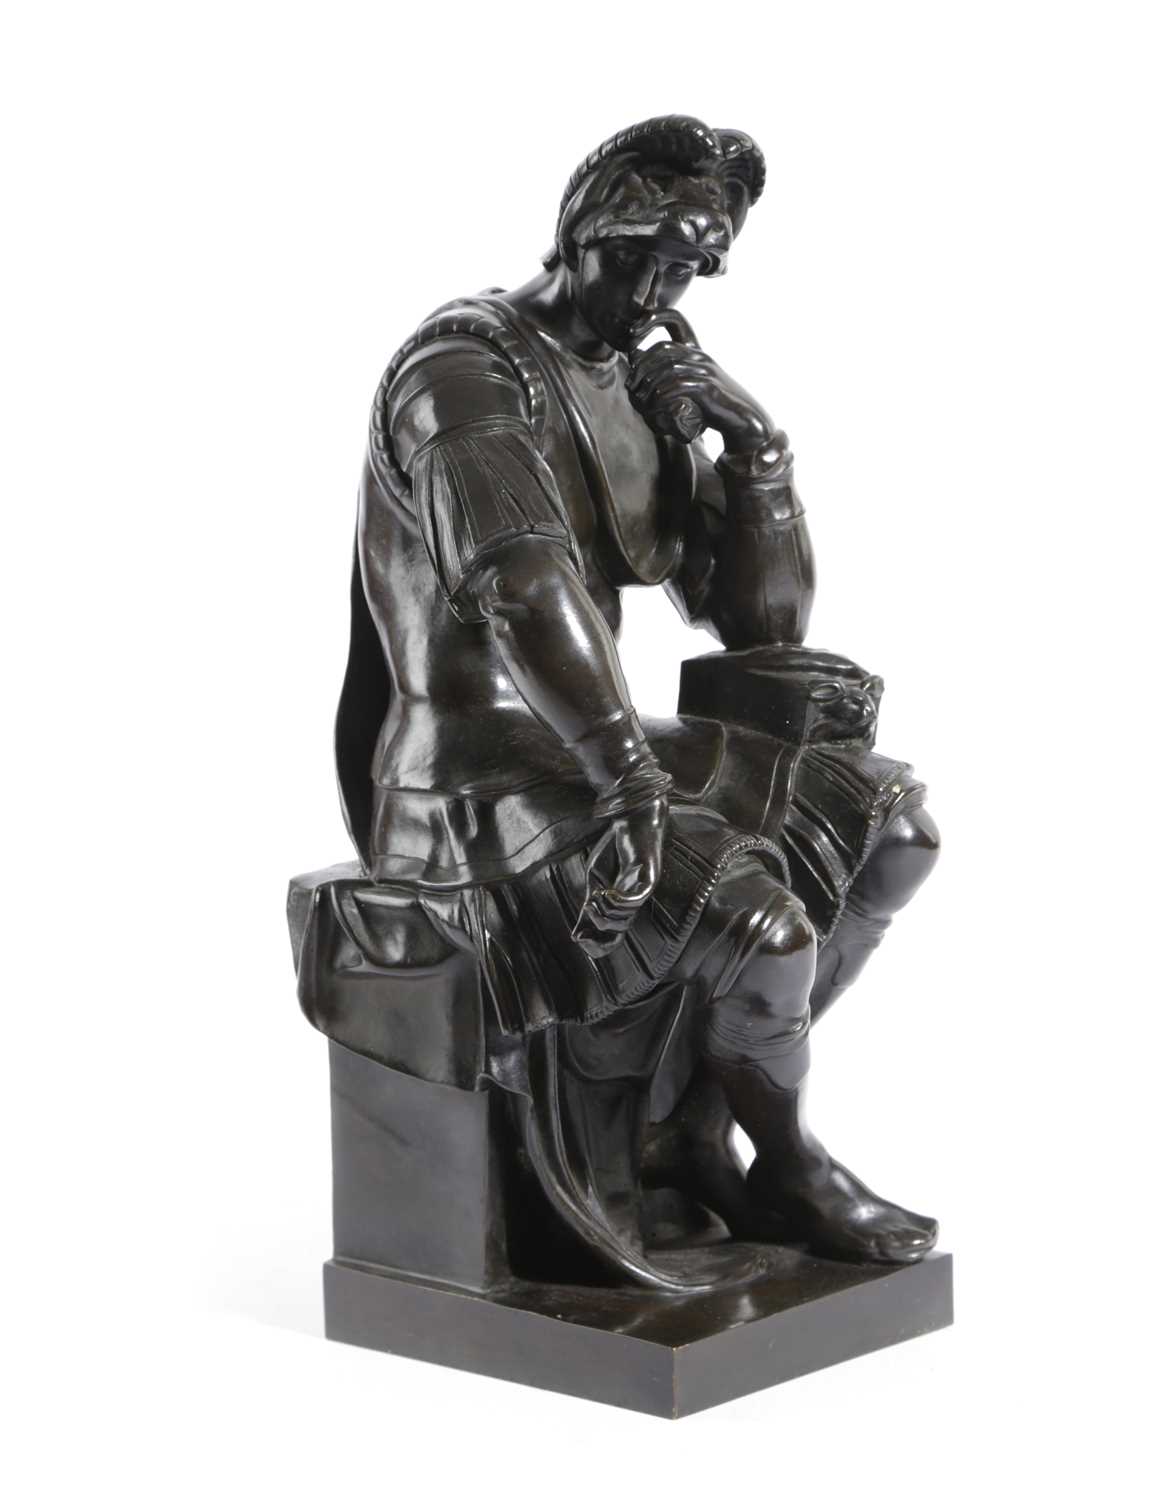 A FRENCH BRONZE GRAND TOUR FIGURE OF LORENZO DE MEDICI AFTER MICHELANGELO, LATE 19TH CENTURY